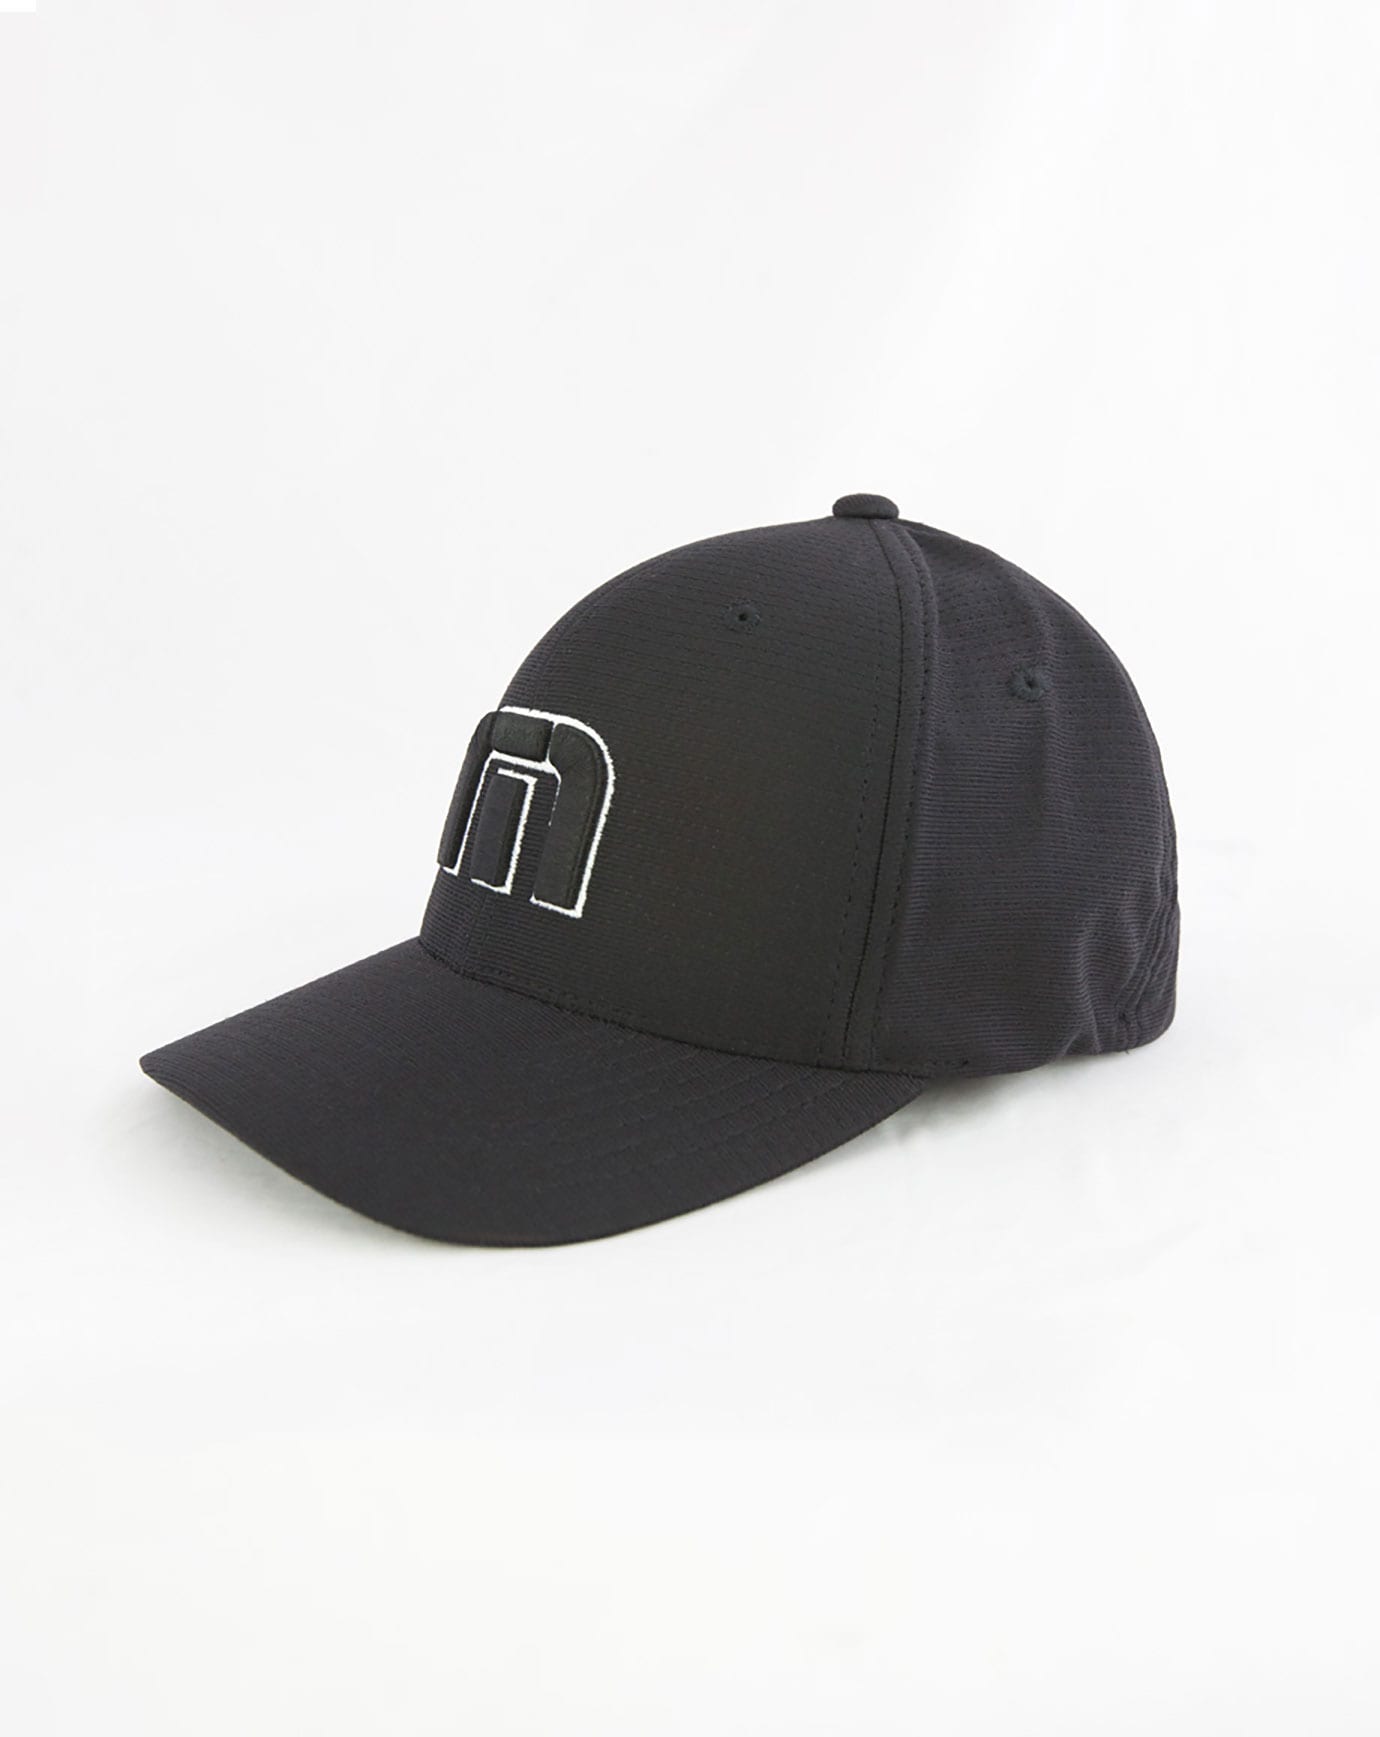 B-Bahamas Fitted Hat Black